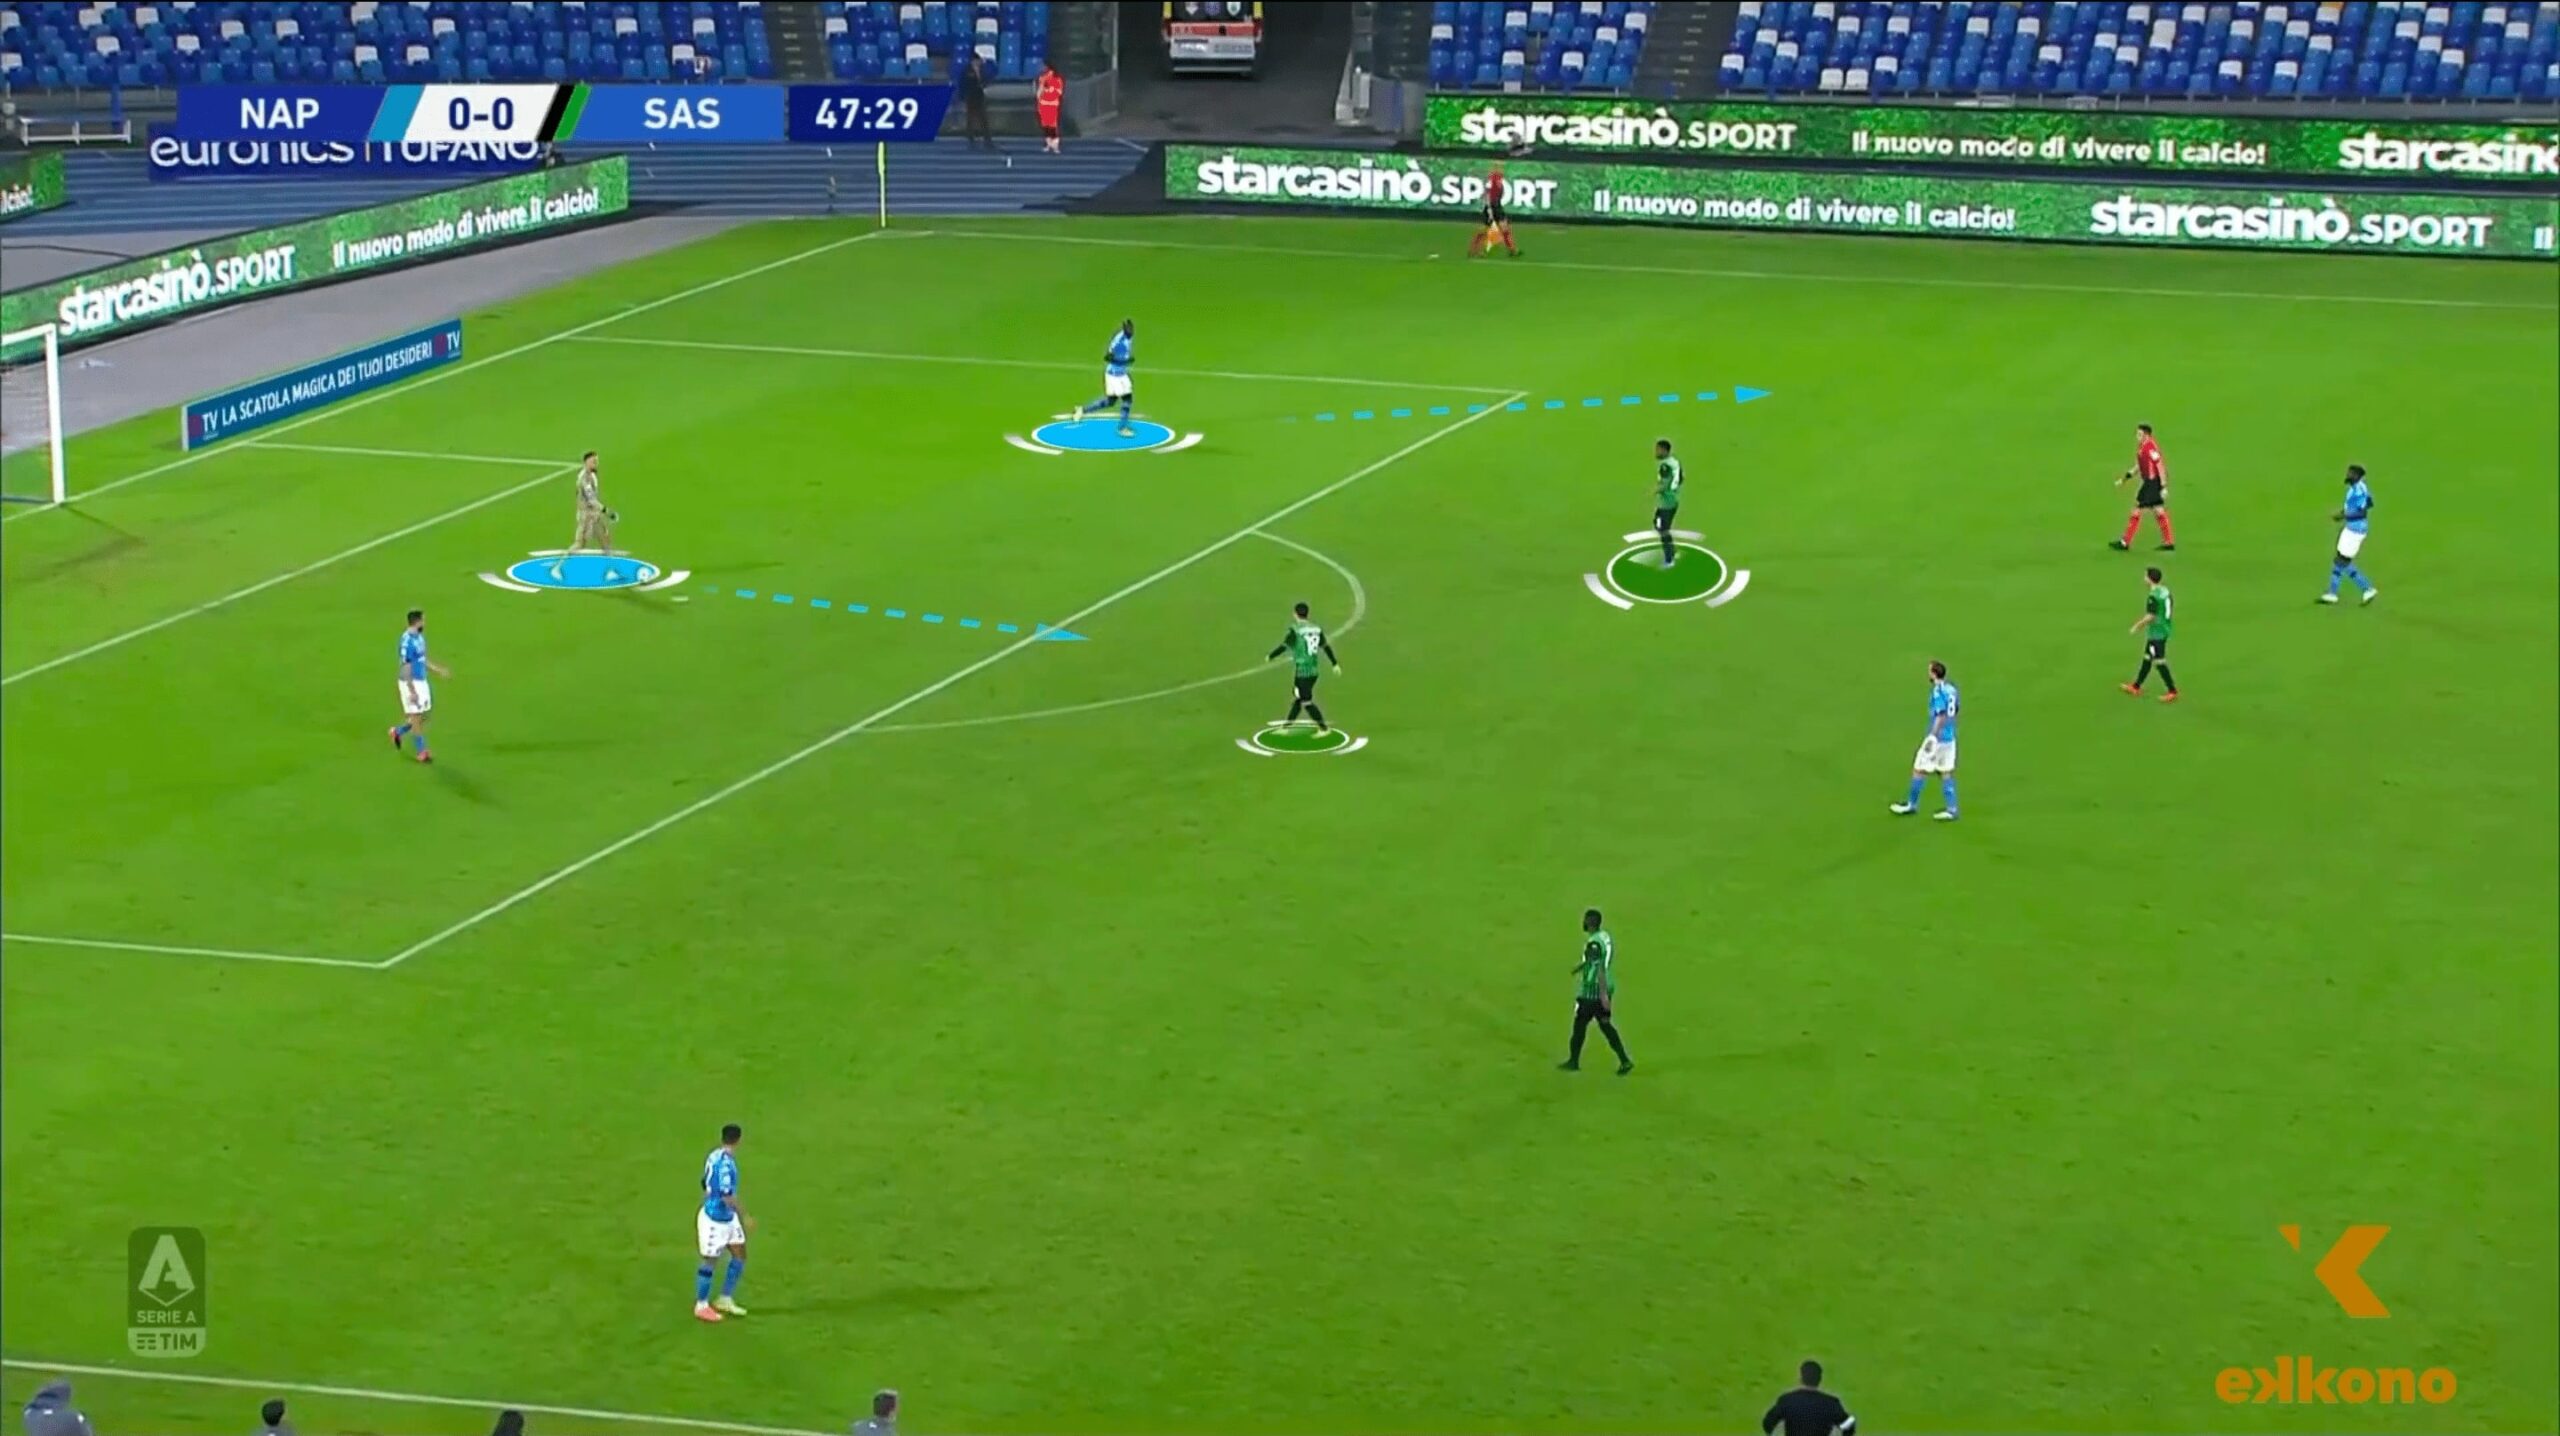 Ospina progresses with the ball and gain time. It gives Koulibaly a chance to relocate and find a better attacking position.